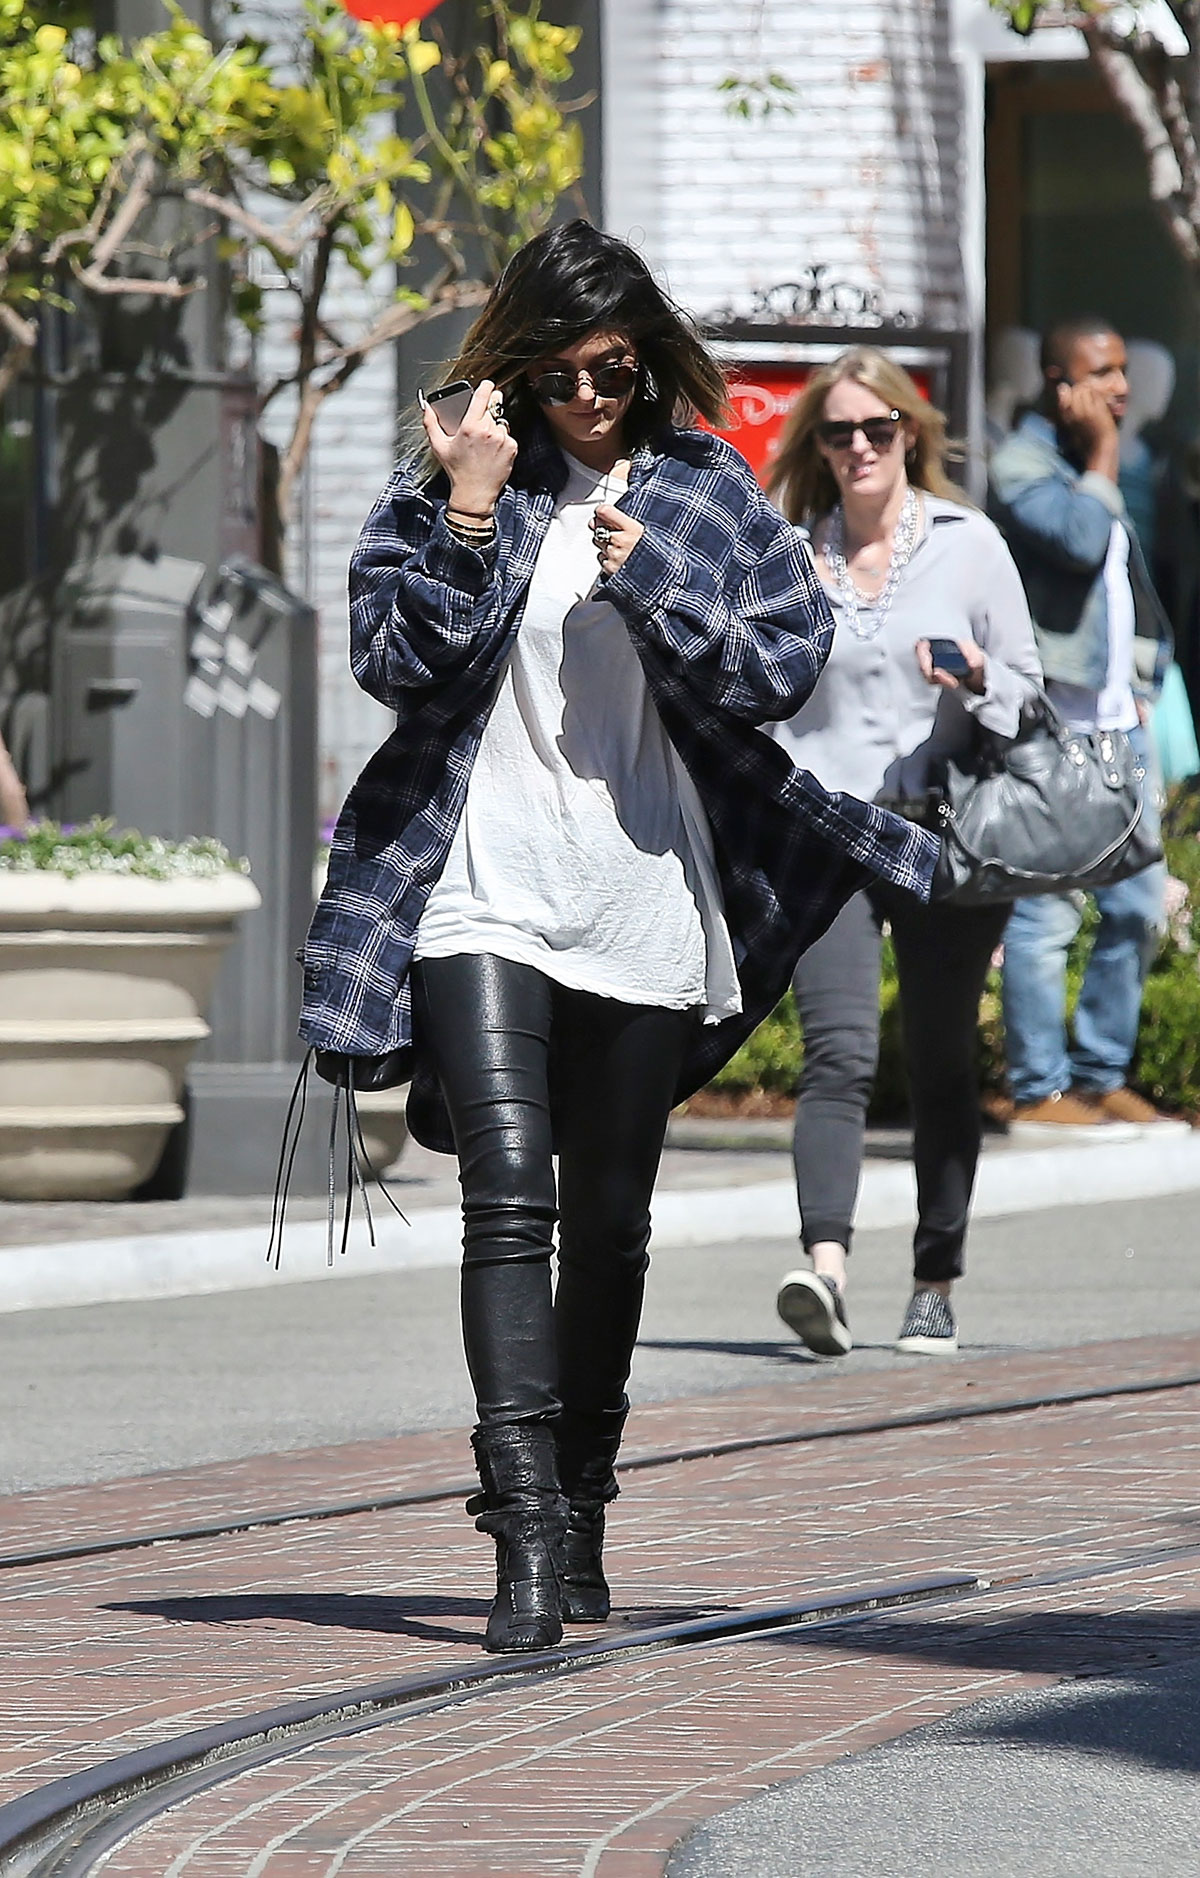 Kylie Jenner shopping at The Grove